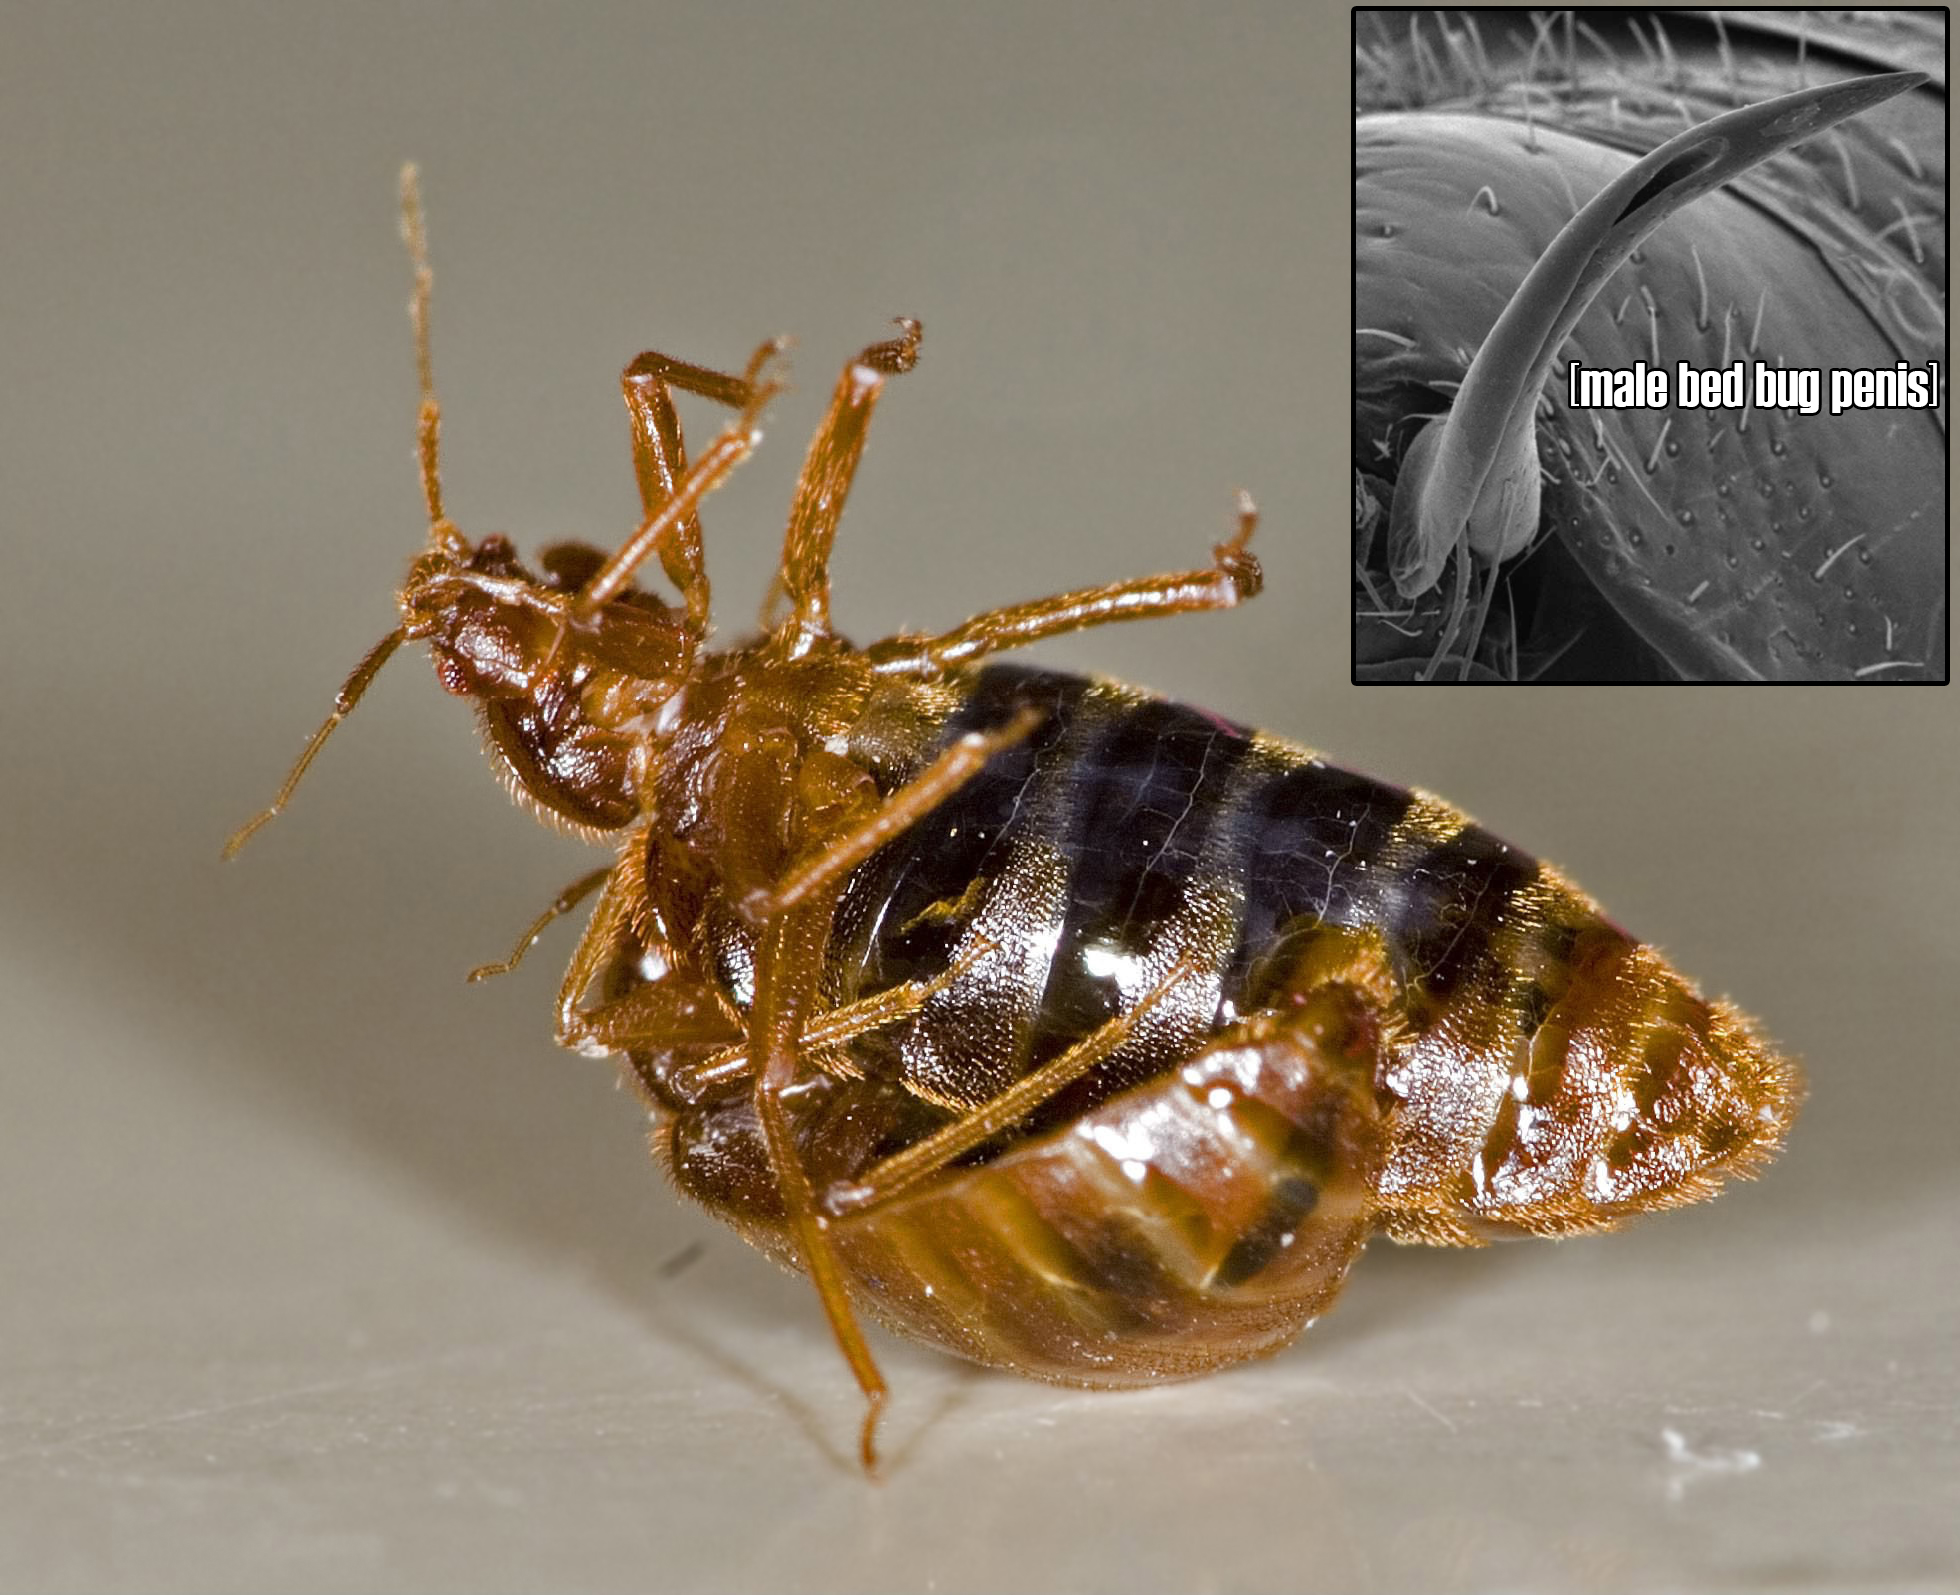 During mating, the male bedbug stabs his sabre-like penis through the female bedbug's abdomen. At one abusive relationship per season, you can tell how old a female bedbug is based on the number of scars on her abdomen.